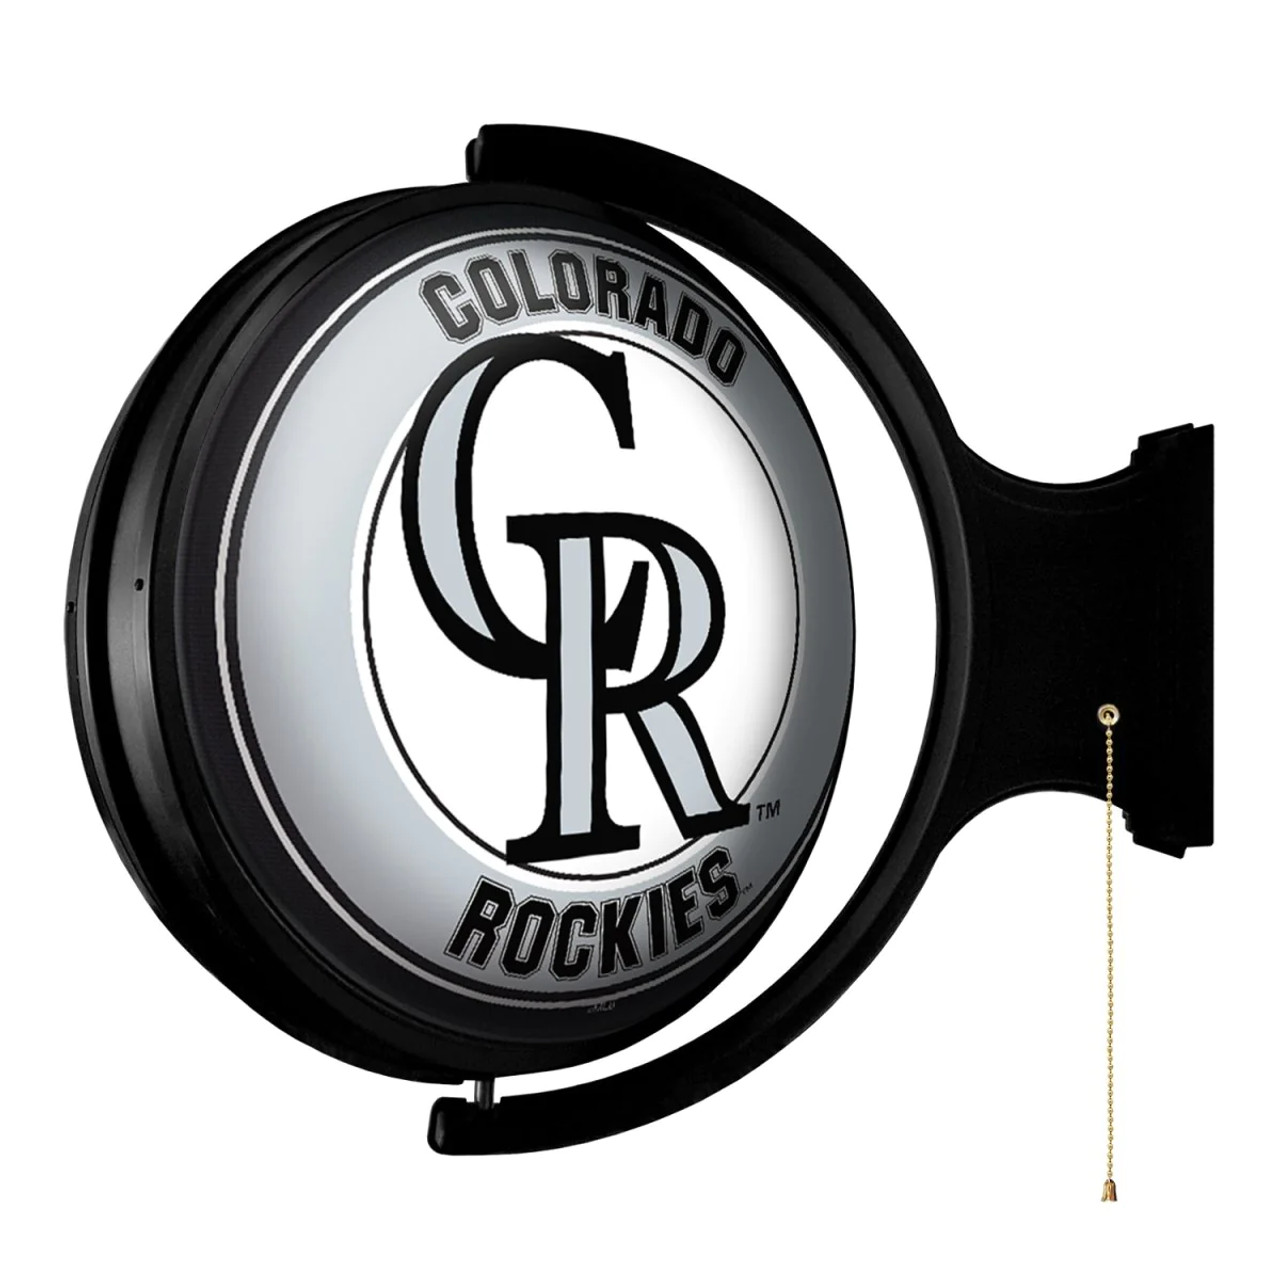 MBCOLO-115-01, COL, Colorado, Rockies,  Original, Round, Rotating, Lighted, Wall, Sign, The Fan-Brand, 704384950134, LED